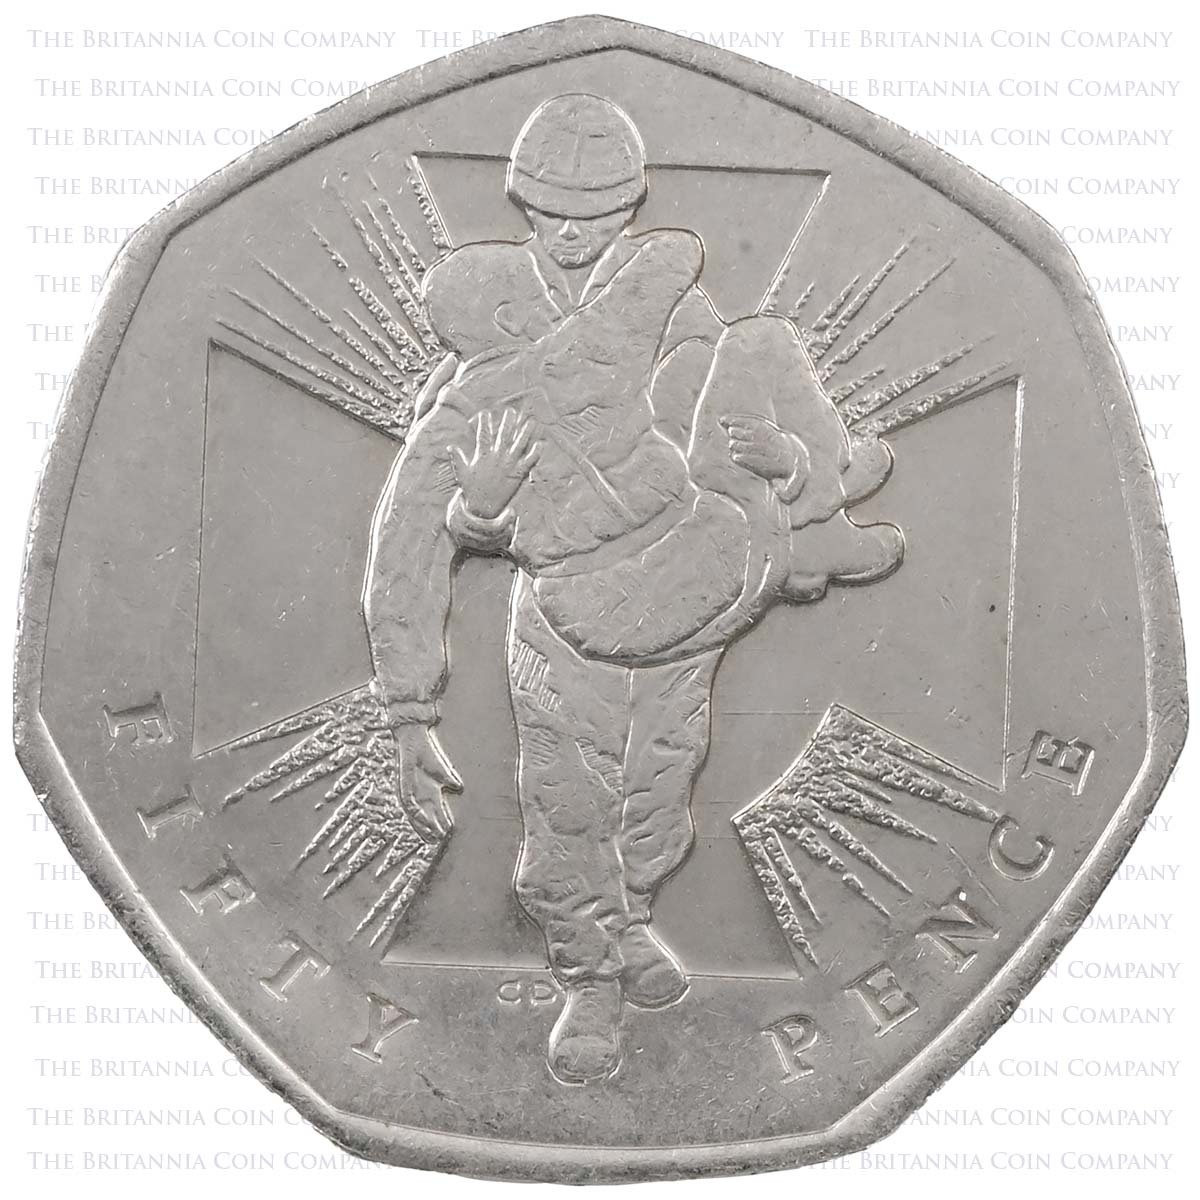 2006 Victoria Cross Soldiers Heroic Acts Circulated Fifty Pence Coin Reverse